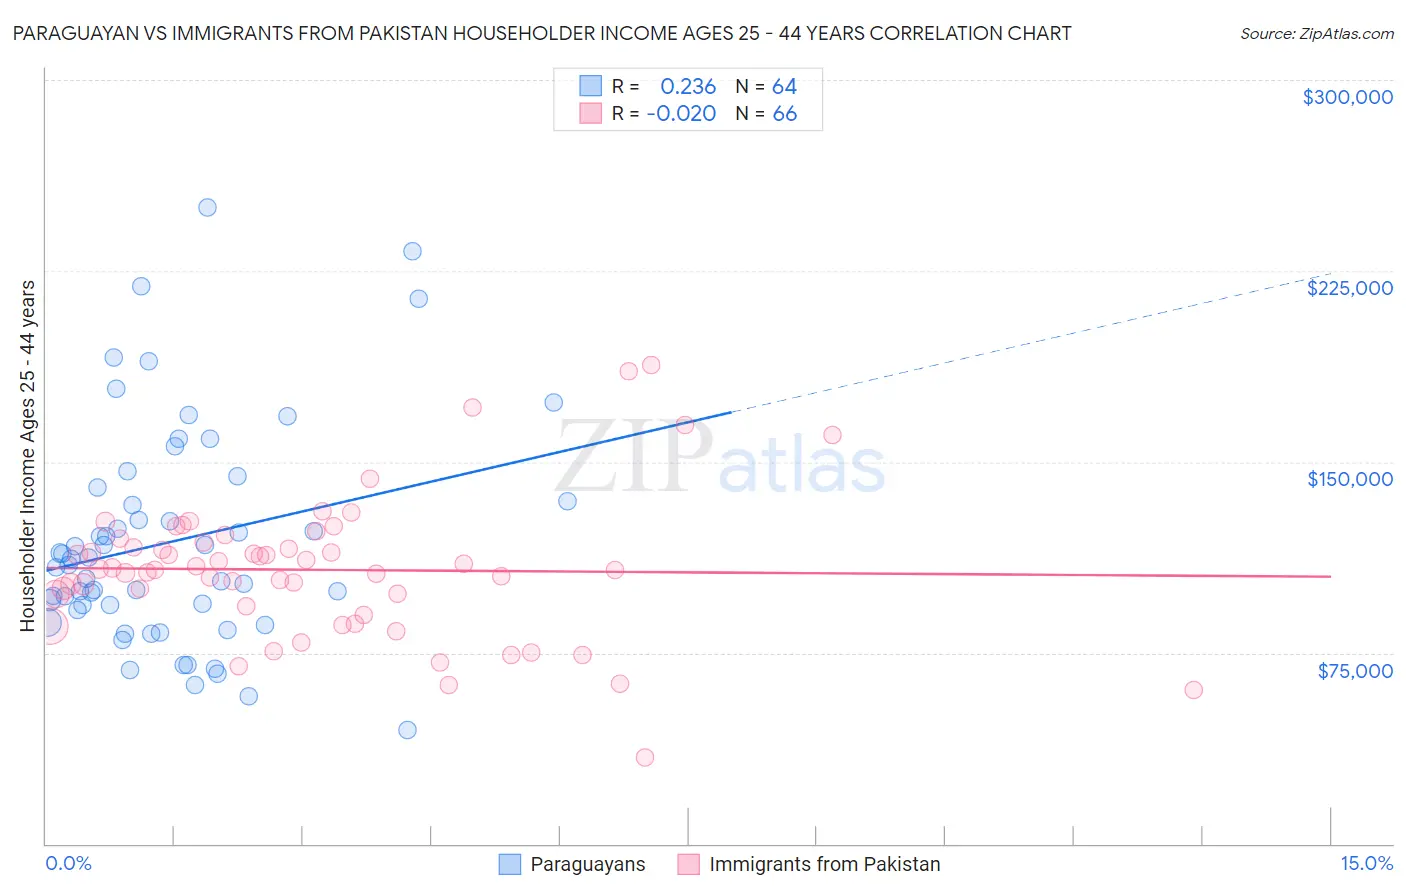 Paraguayan vs Immigrants from Pakistan Householder Income Ages 25 - 44 years